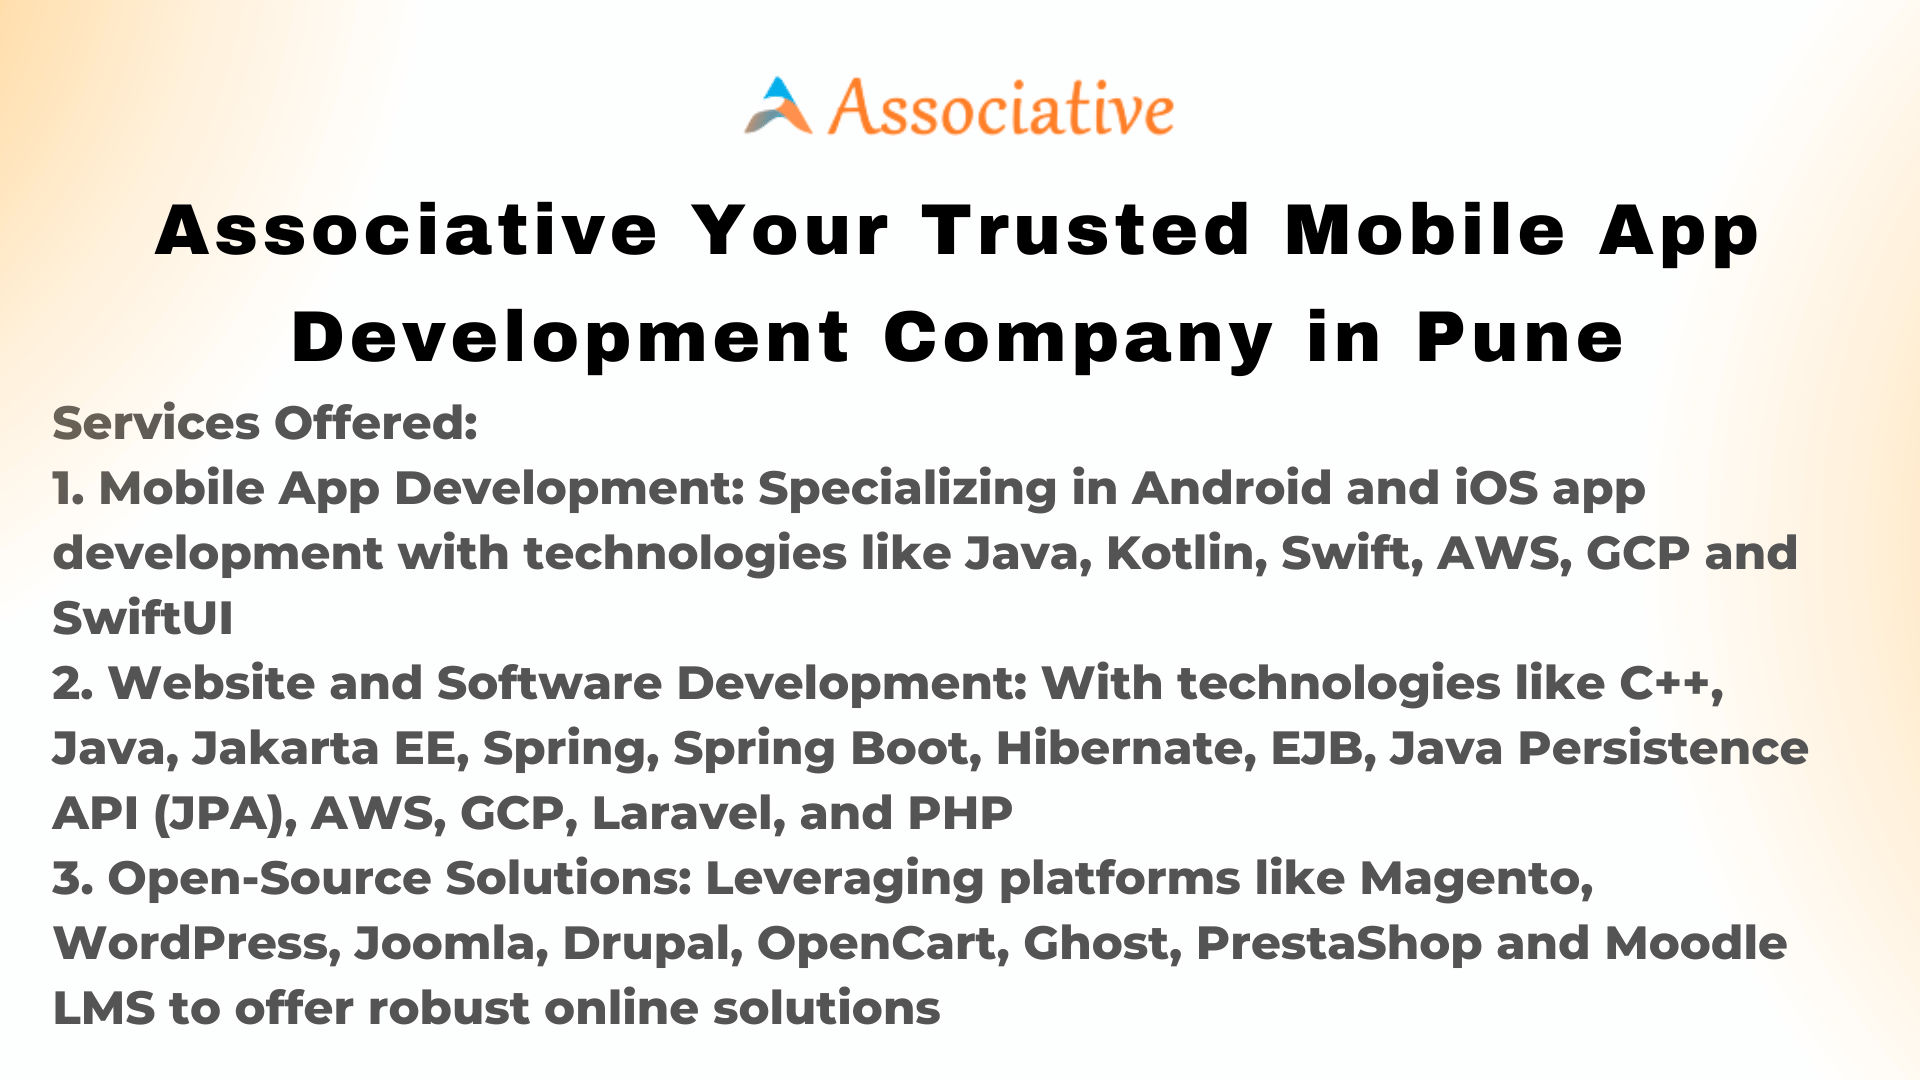 Associative Your Trusted Mobile App Development Company in Pune